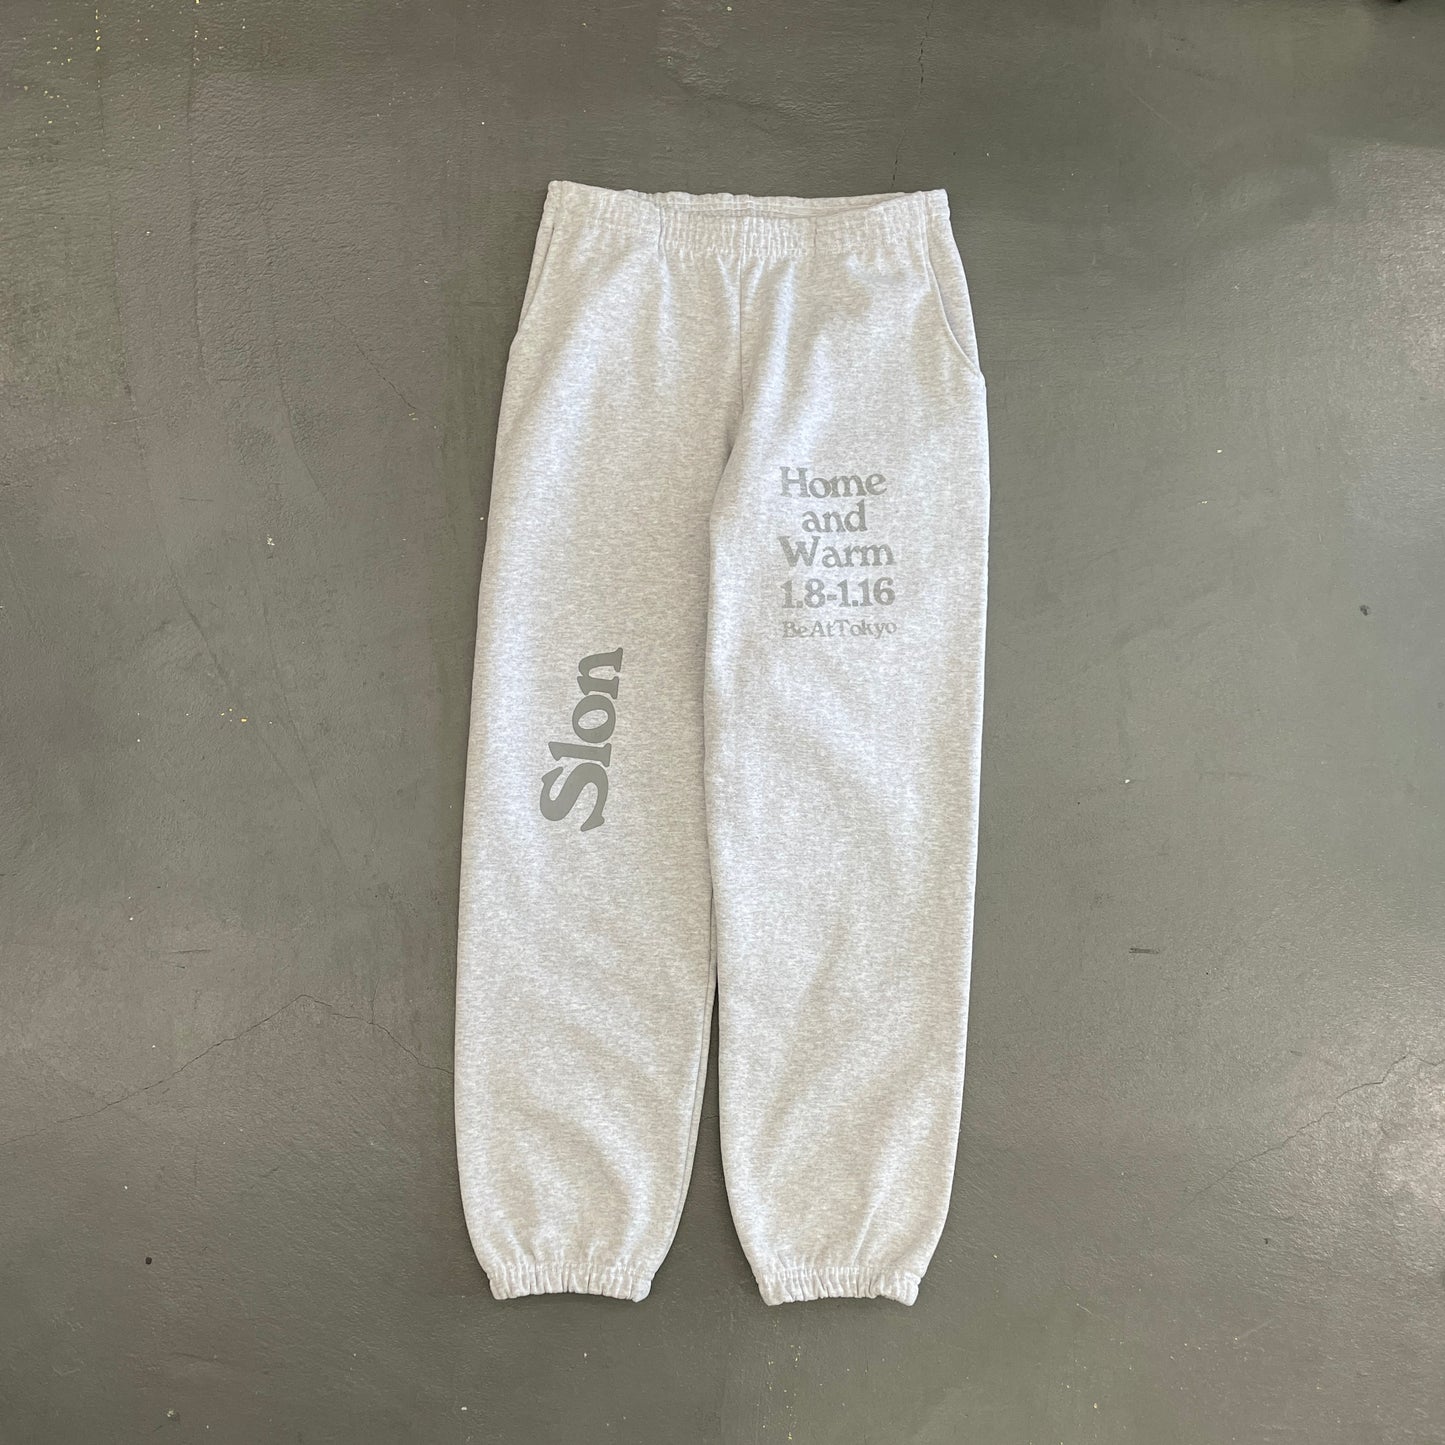 SLON × BE AT TOKYO "HOME AND WARM" Home Wear - Sweatpants